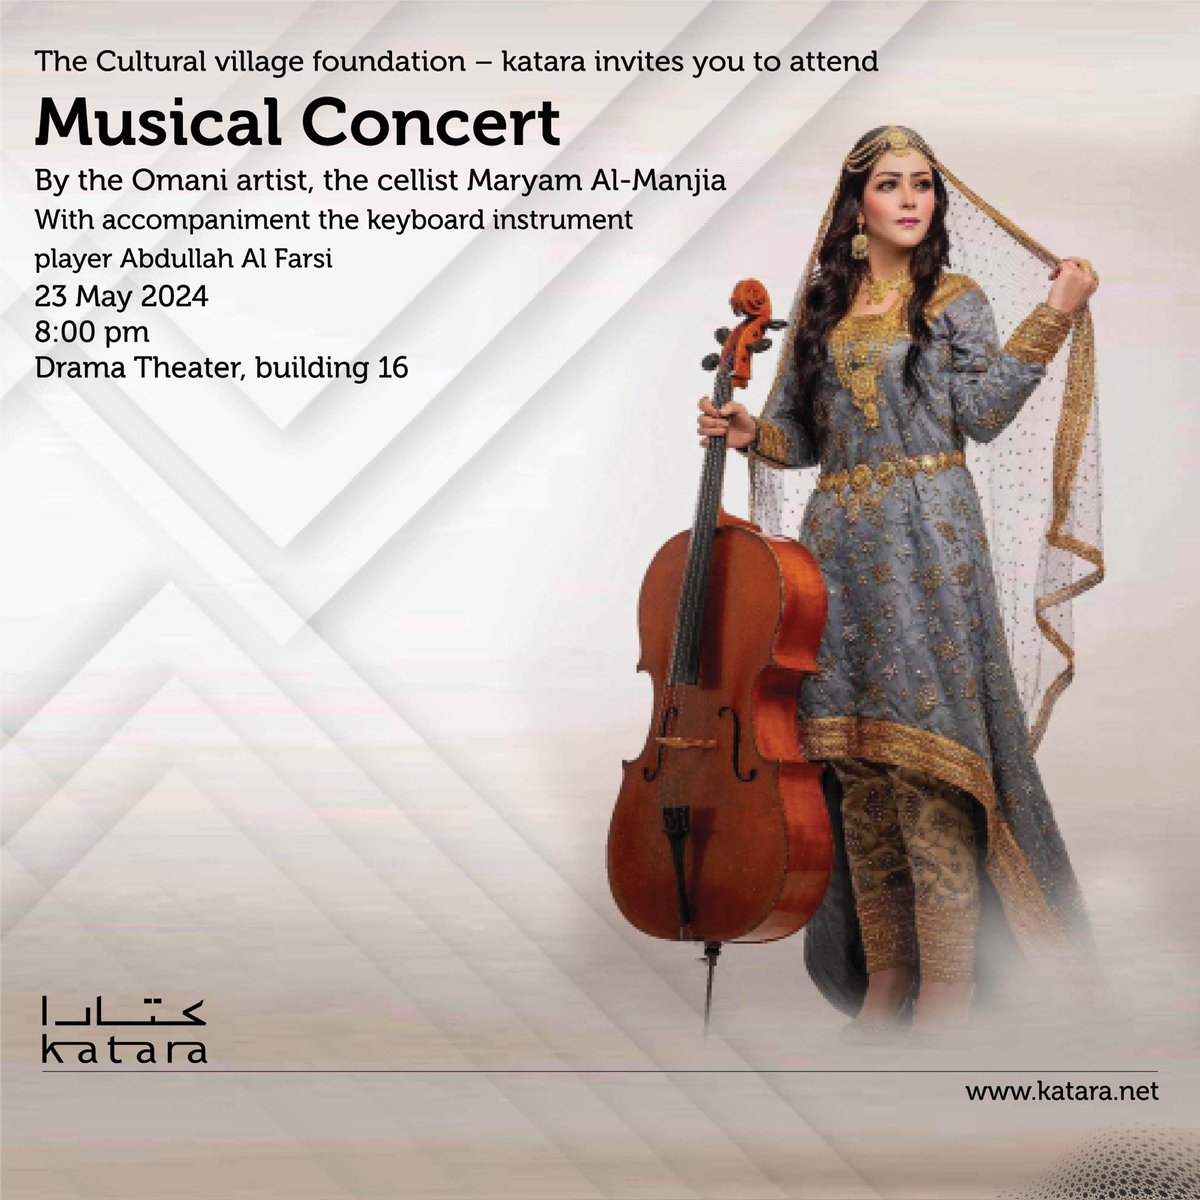 A musical evening featuring by the Omani artist, the cellist Maryam Al-Manjia, and the keyboard instrument player Abdullah Al-Farsi, will be held at the Cultural Village #Katara. Open invitation @maryam_cello @aboood_galaxy #Qatar #Oman